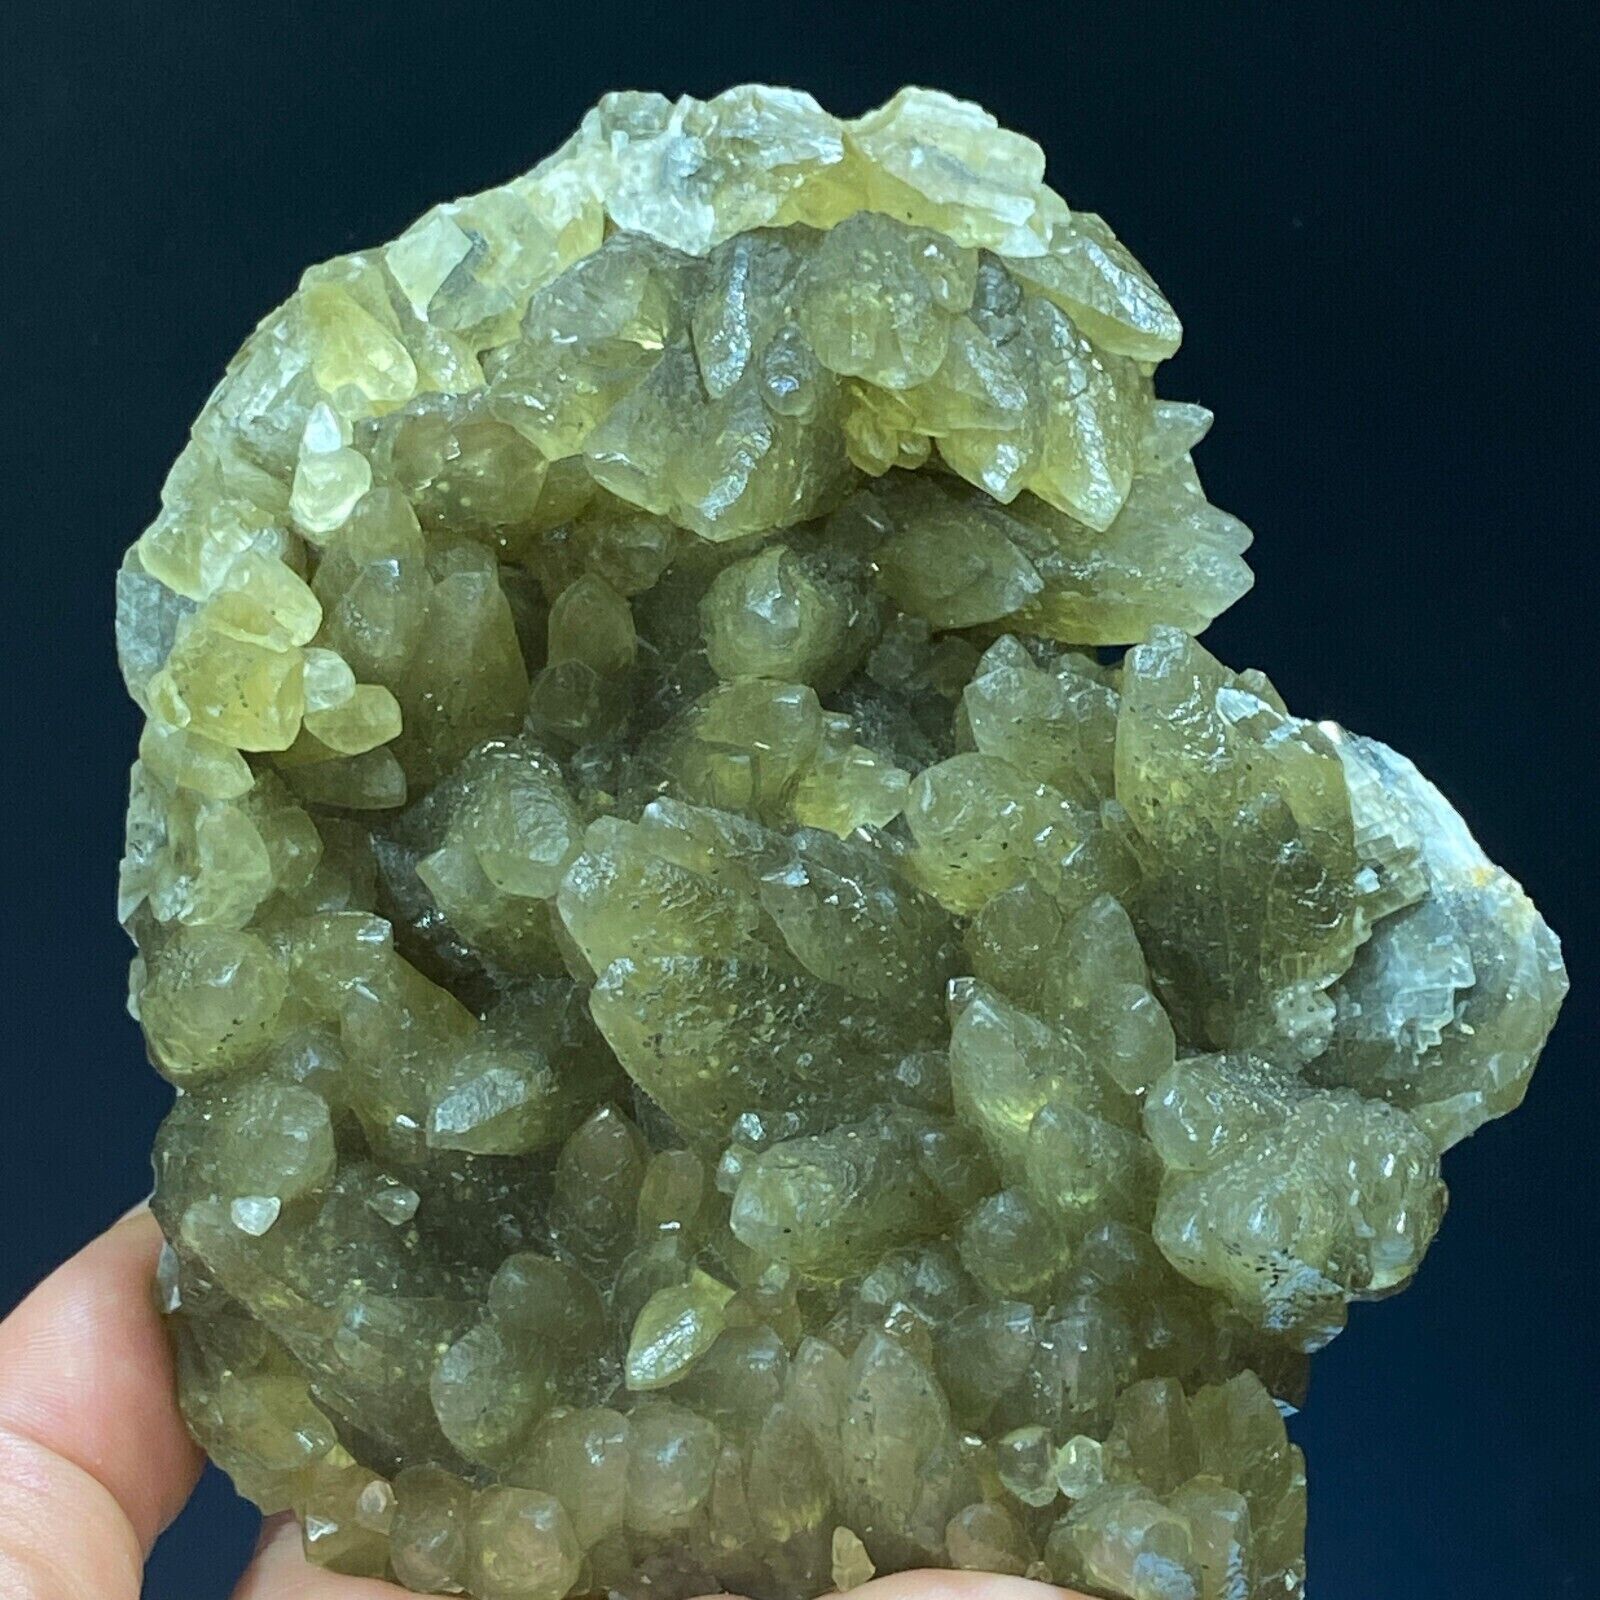 531g Natural Yellow Dogtooth Calcite Crystal Mineral Specimen /Guiyang, Guizho